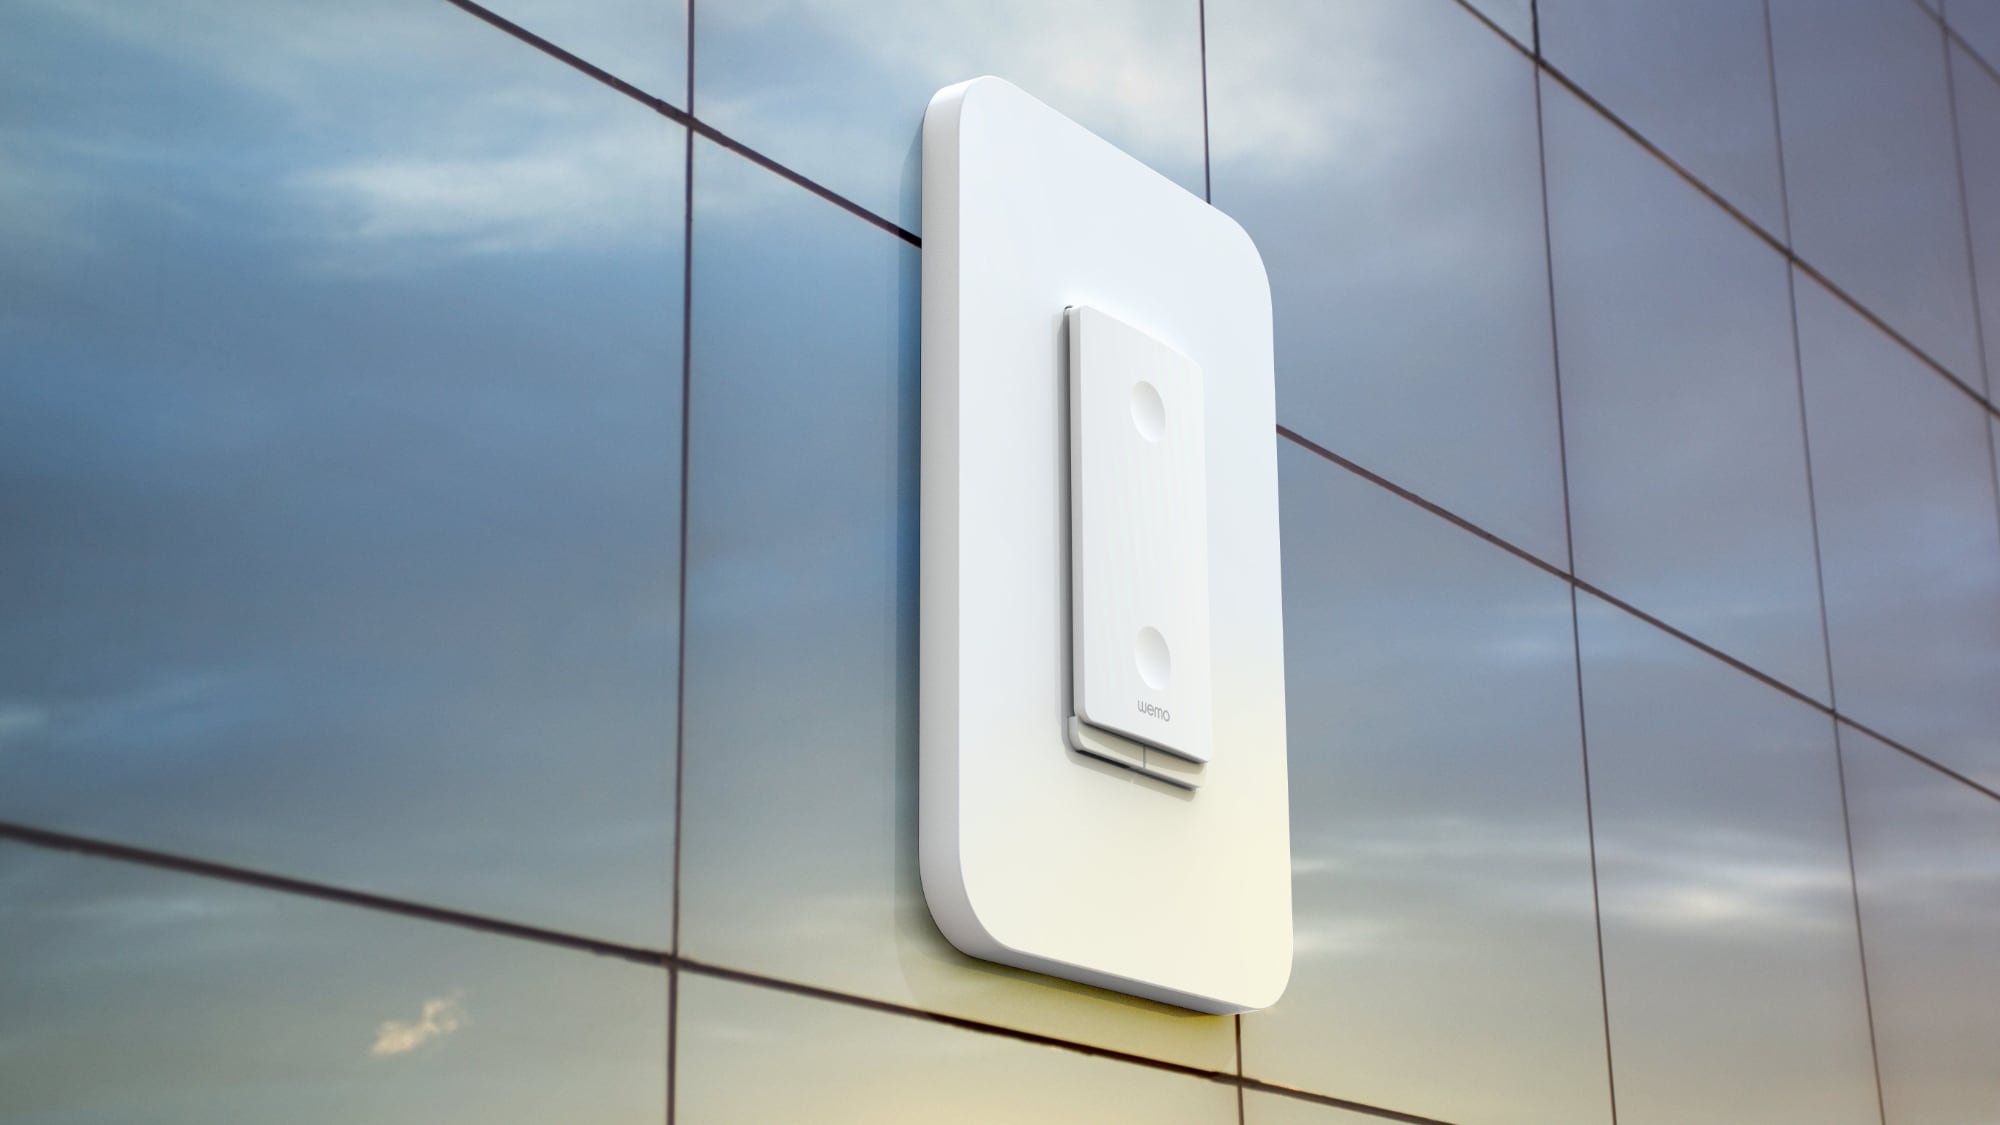 Belkin’s Wemo Brand Launches New Smart Dimmer With Thread Support